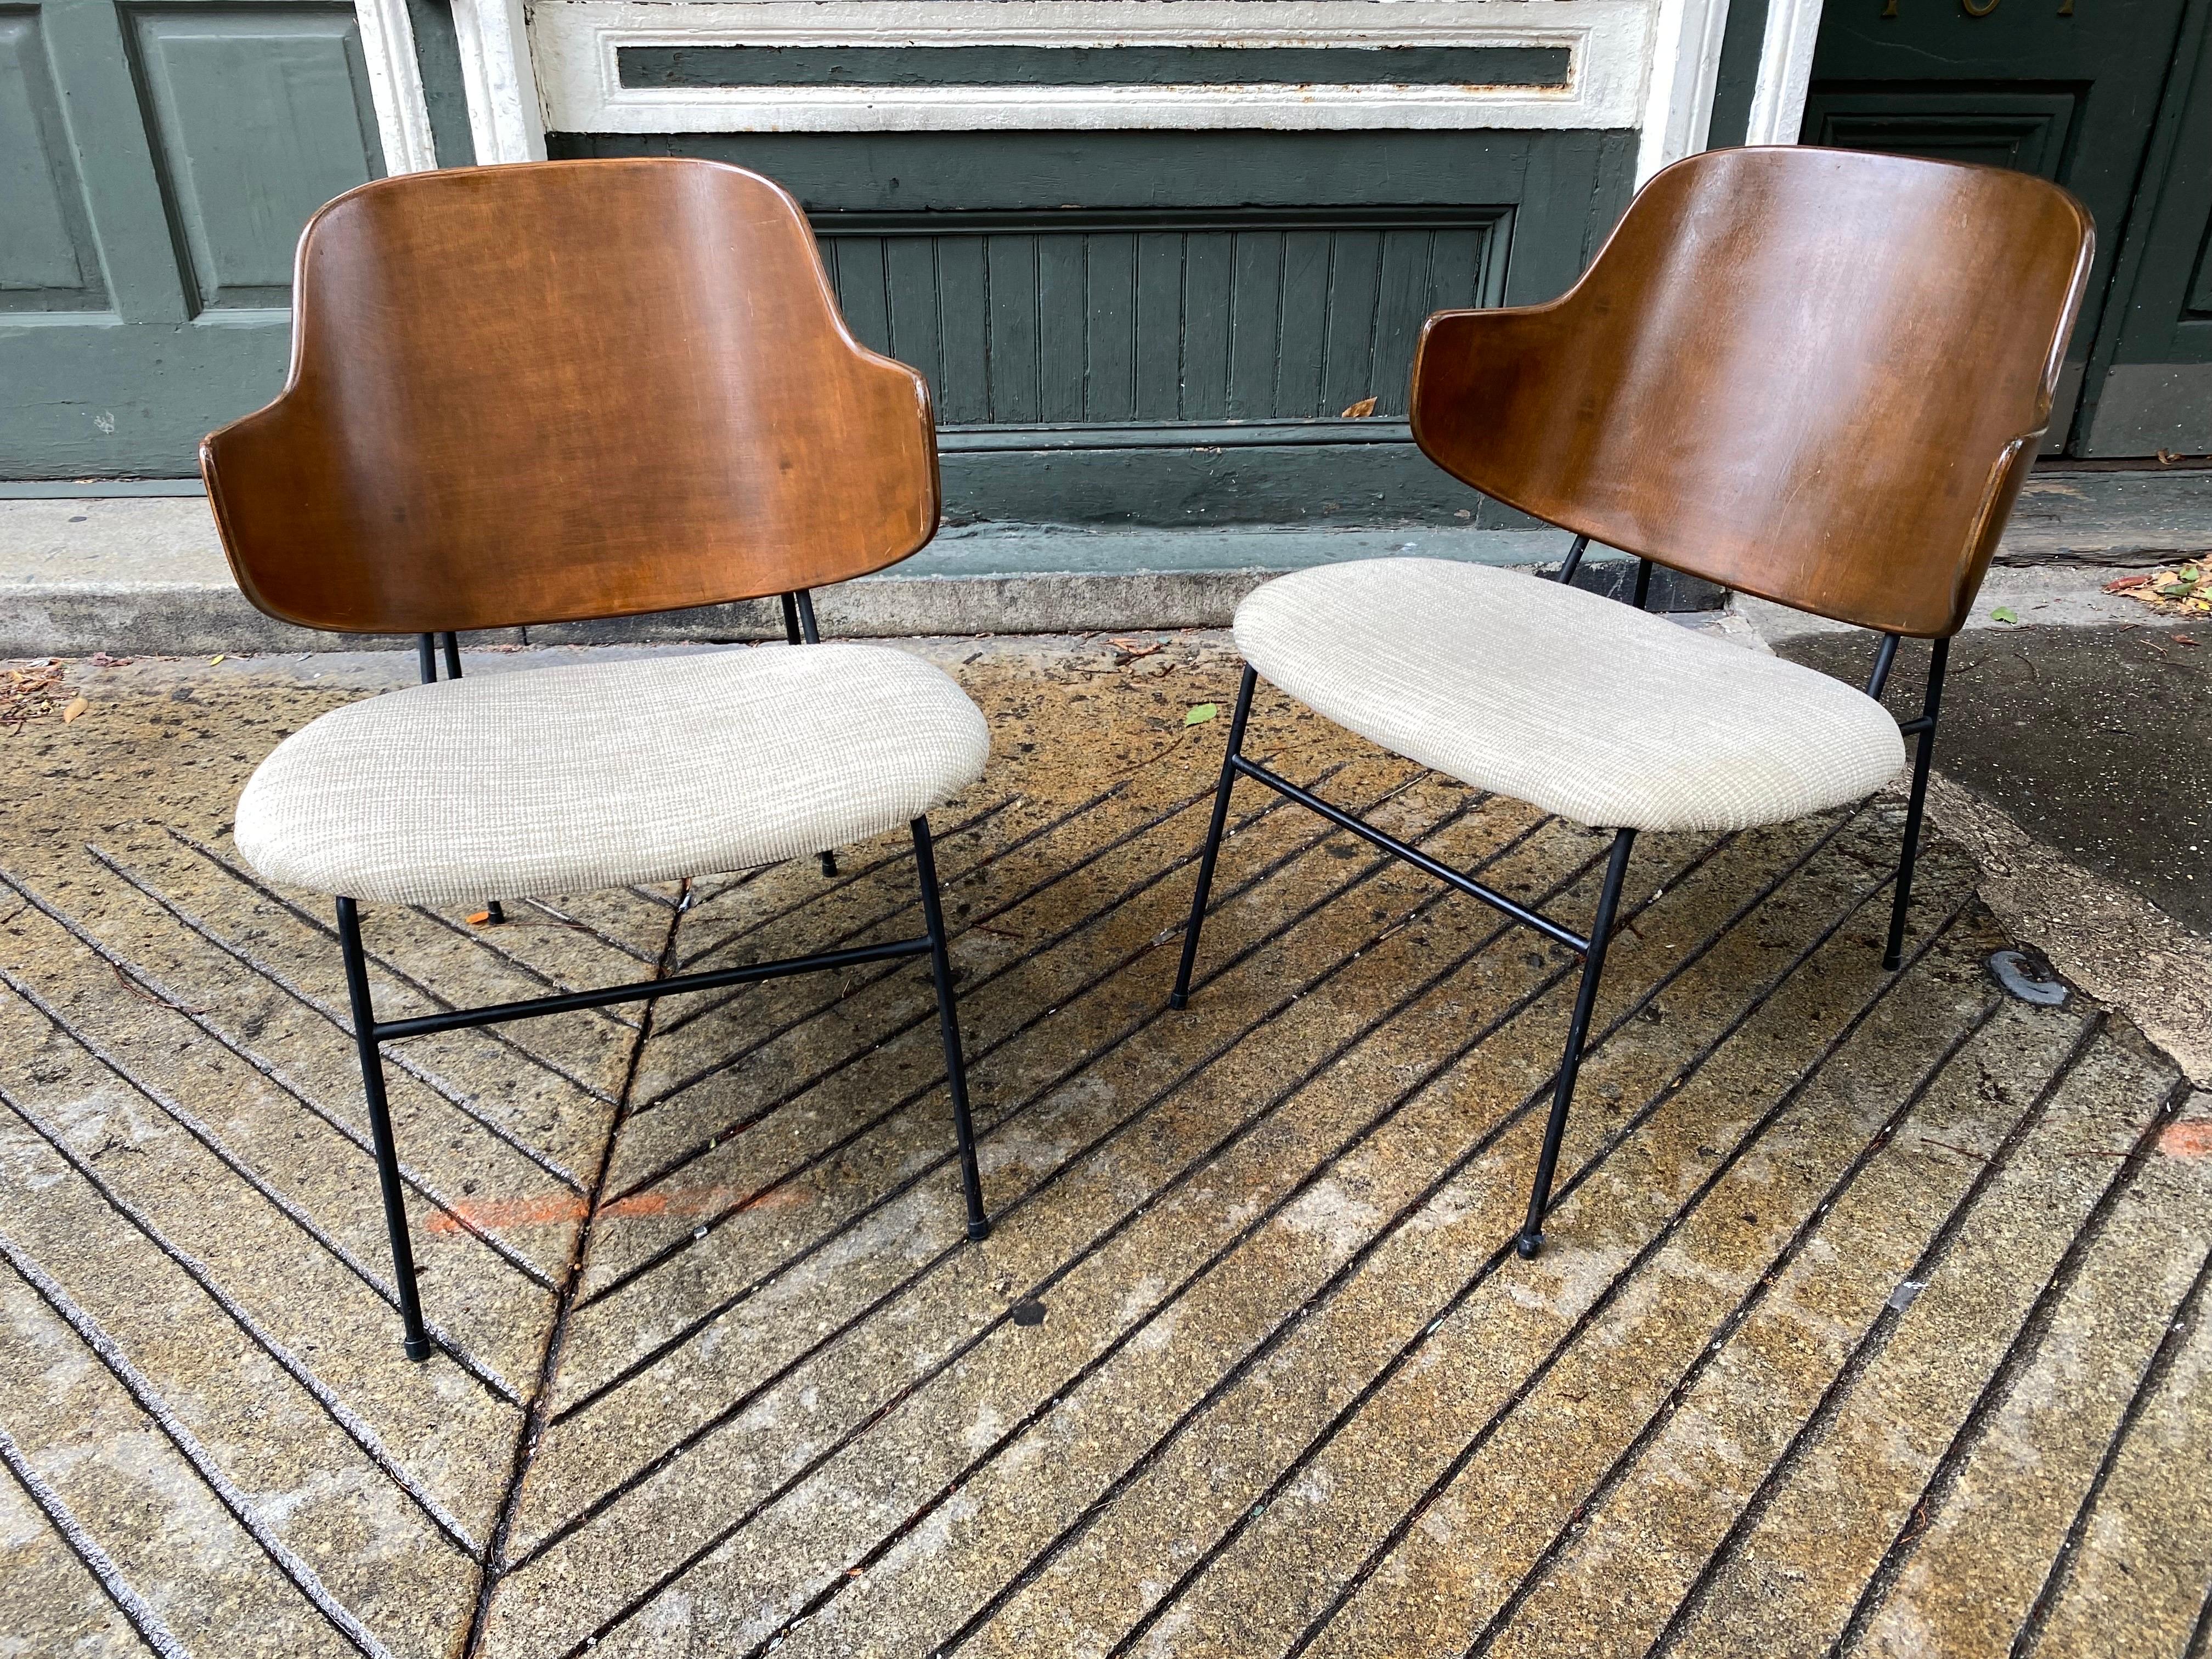 Ib Kofod Larsen Penguin chairs with walnut backs and black metal frames. Extremely comfortable and great scale!  Wood shows a little wear but all original.  Seat were recovered within last 5 years.
 